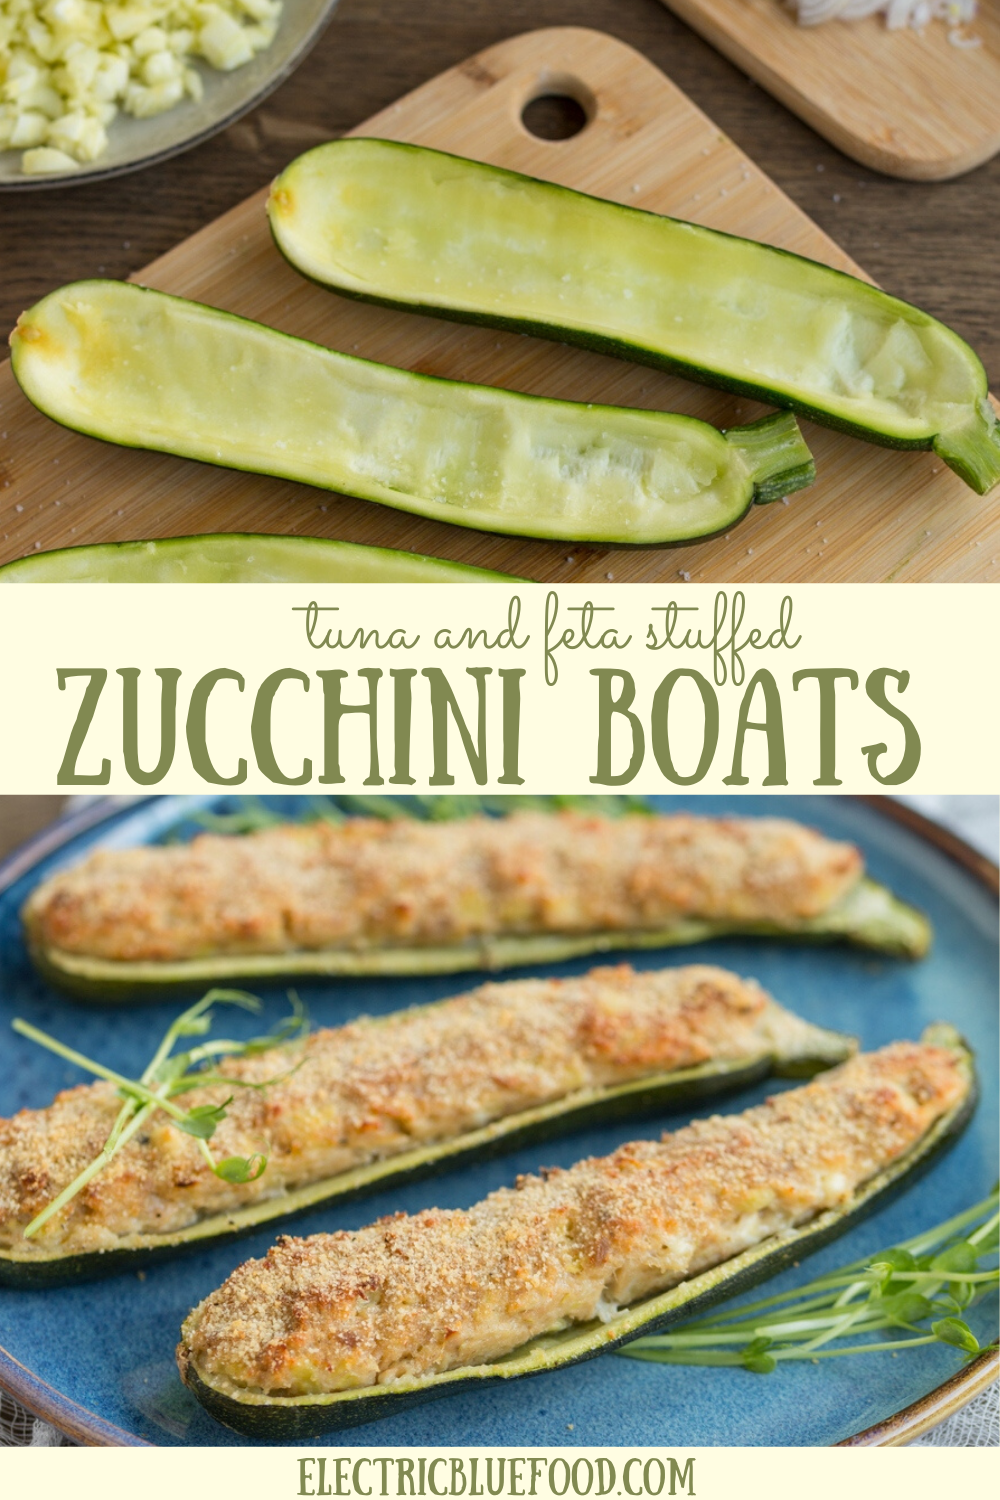 Stuff your zucchini with tuna and feta and bake them in the oven. Your tuna zucchini boats will be a success!